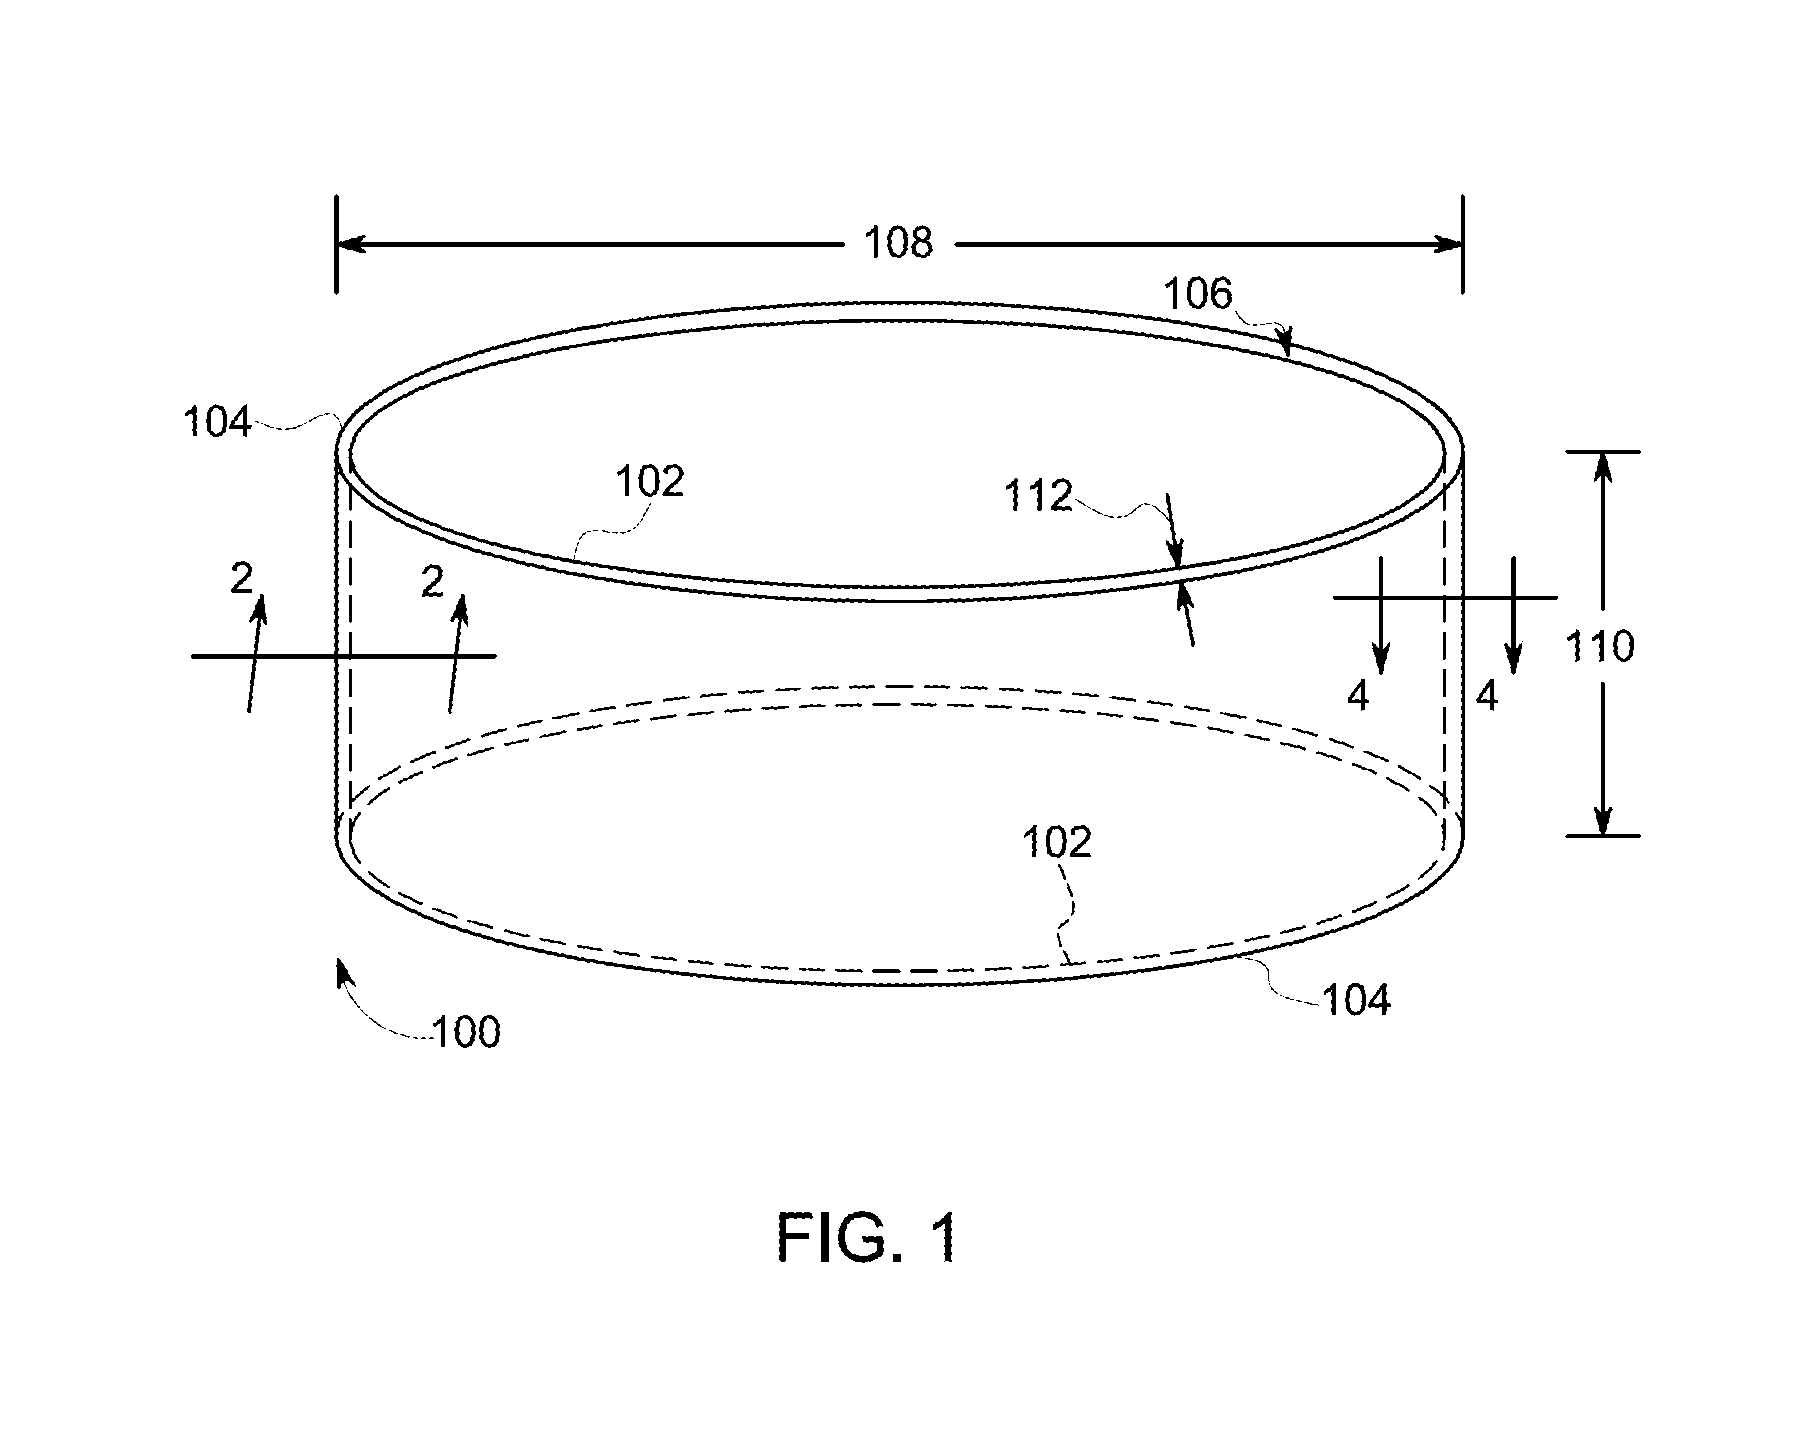 Laminated-barrel structure for use in a stator-type power generator